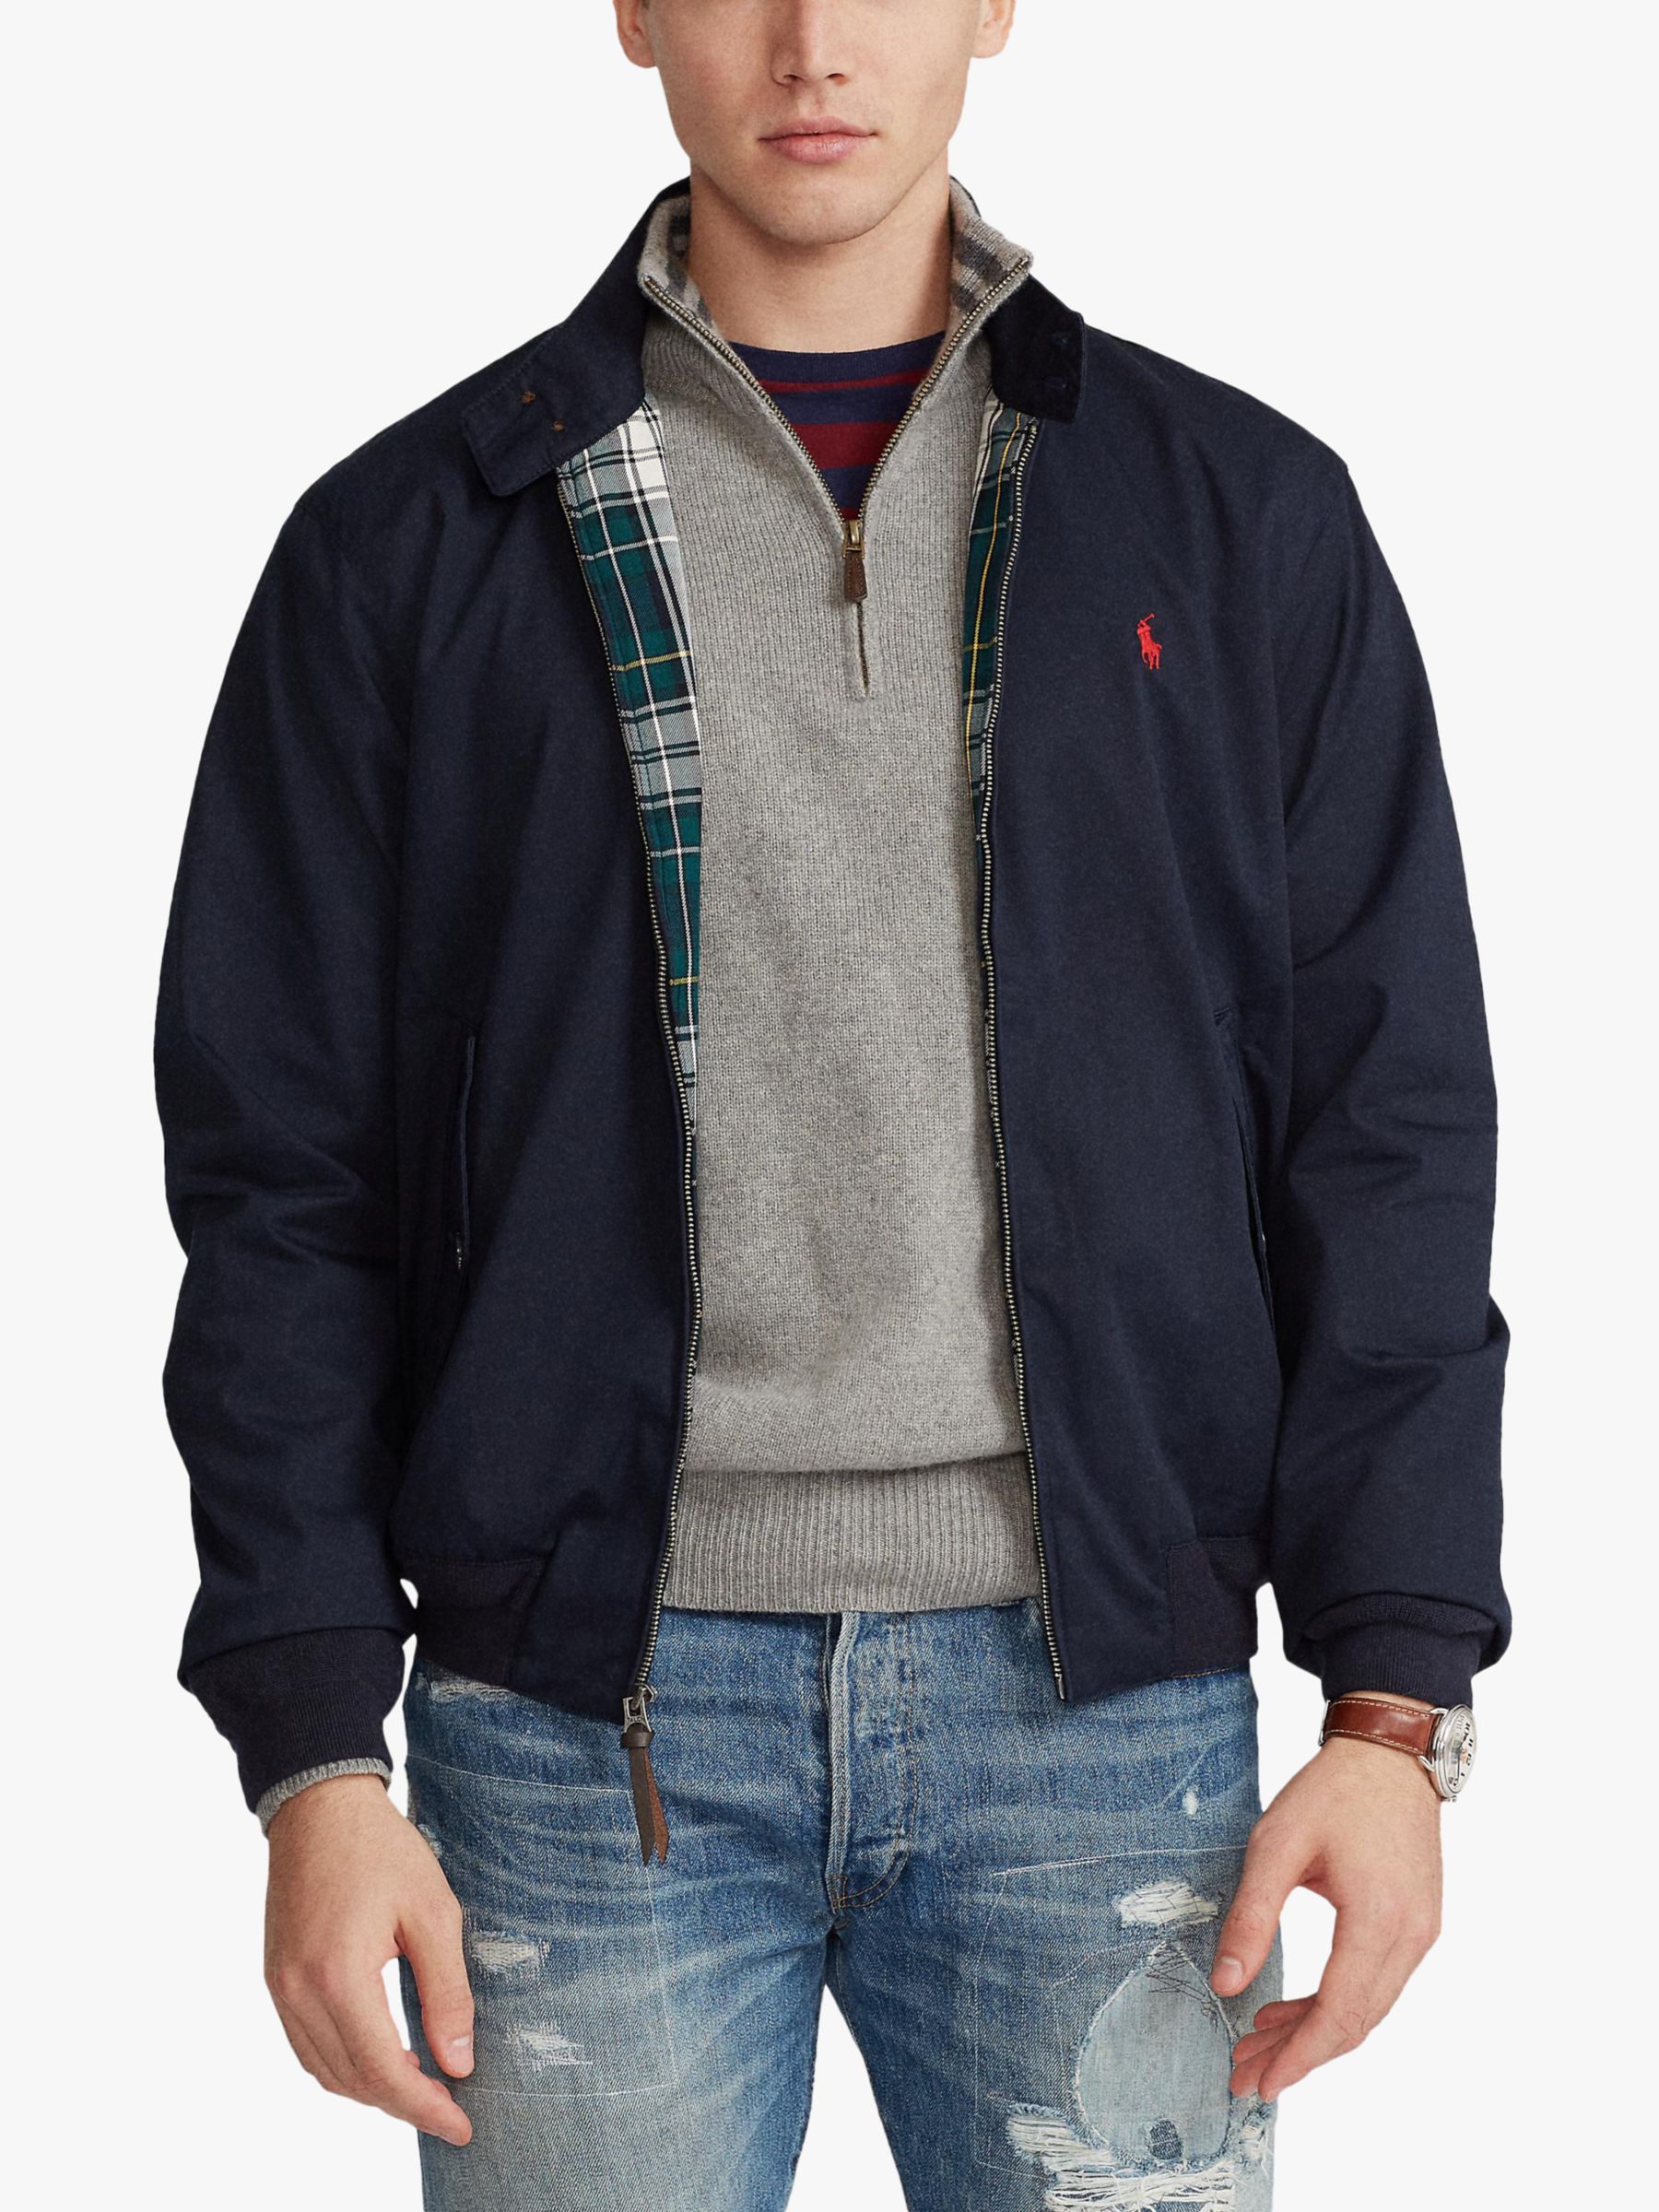 Polo Ralph Lauren Cotton Twill Lined Jacket, Collection Navy, S